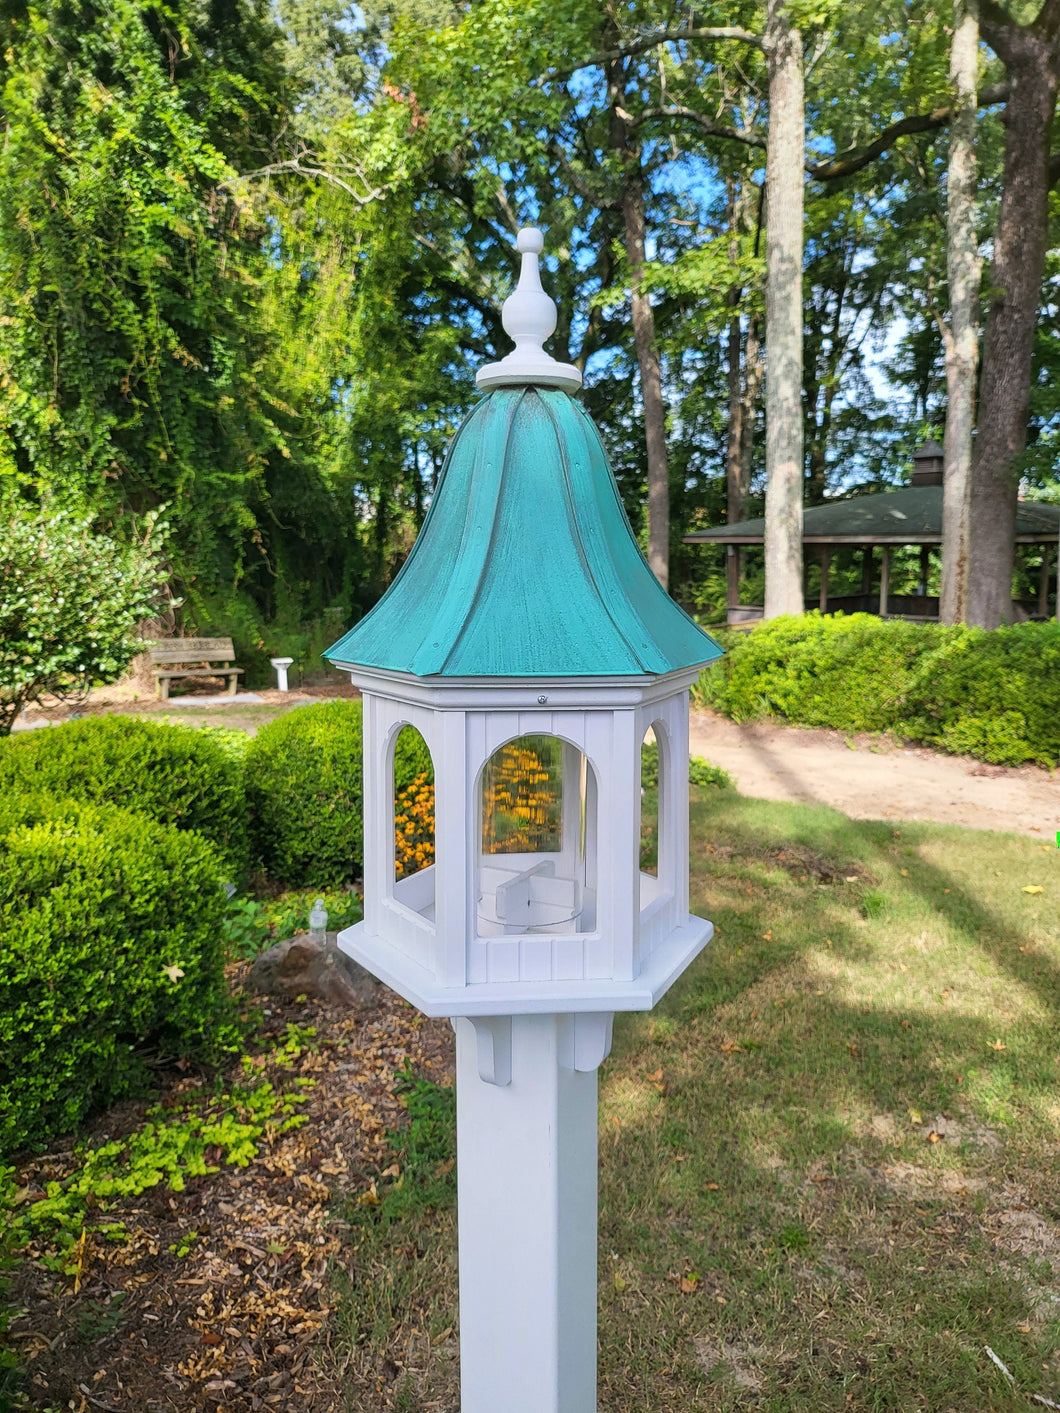 Patina Copper Roof Bird Feeder Large, 6 Sided, Bell Shaped Roof, Premium Feeding Tube - Patina Roof